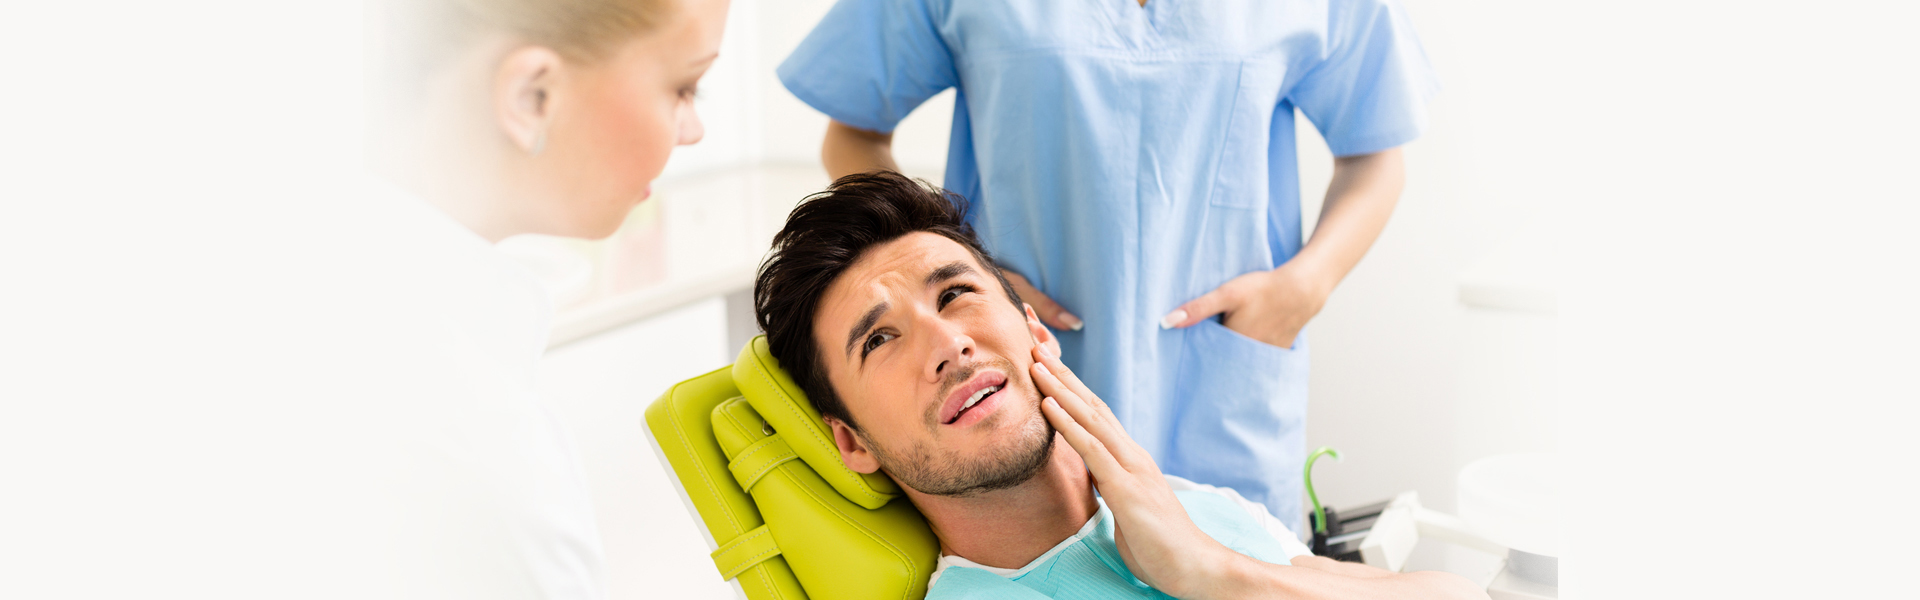 All You Need to Know About Oral Cancer Exams